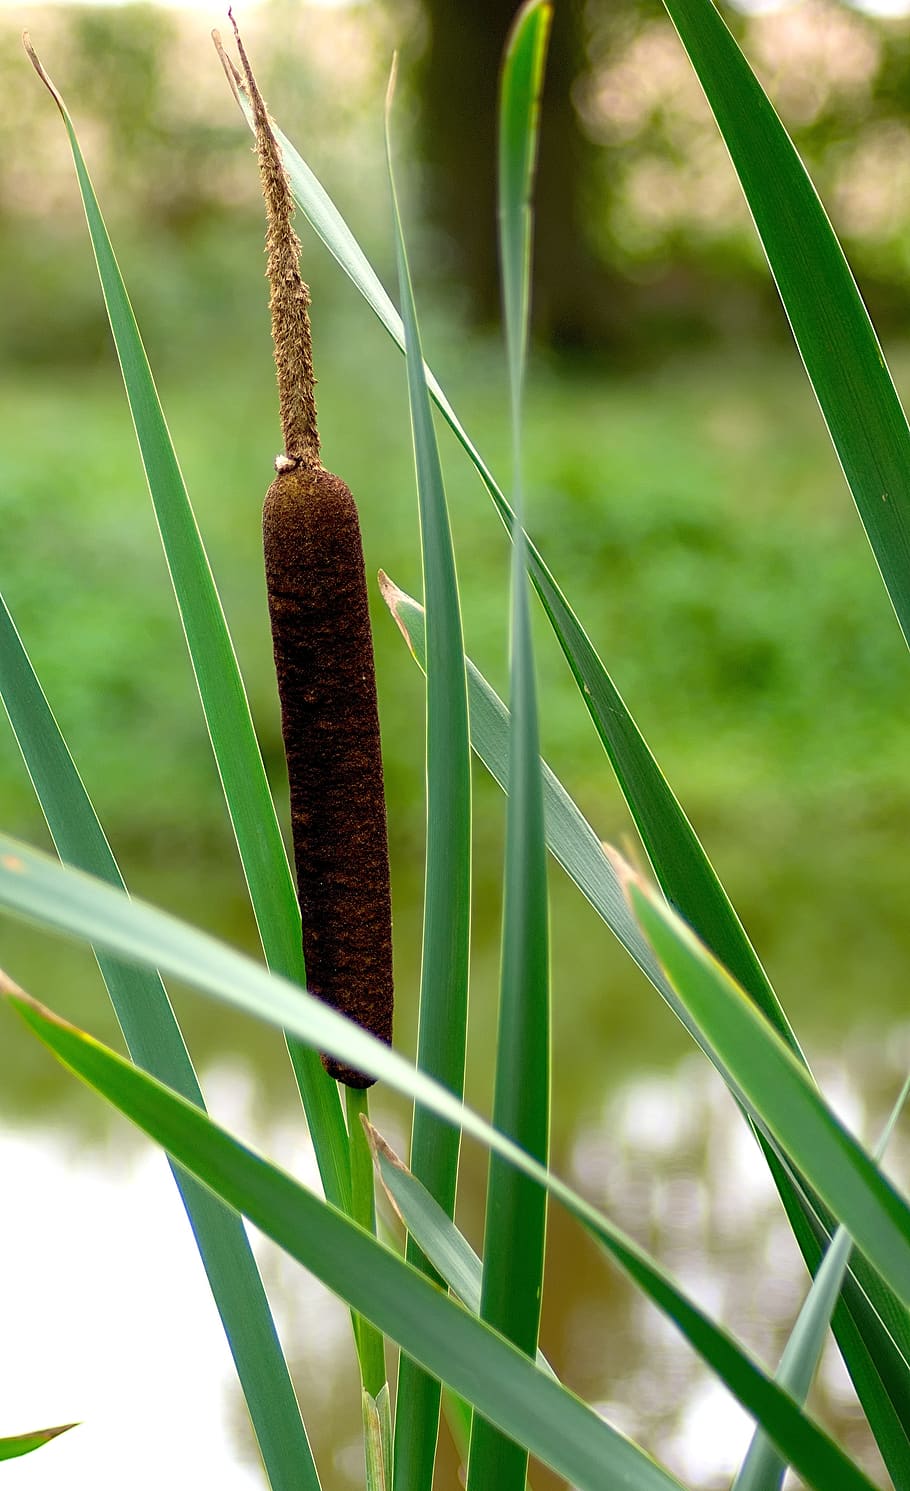 cattail, reed, marsh plant, wetland, tube piston greenhouse, plant, growth, close-up, green color, focus on foreground